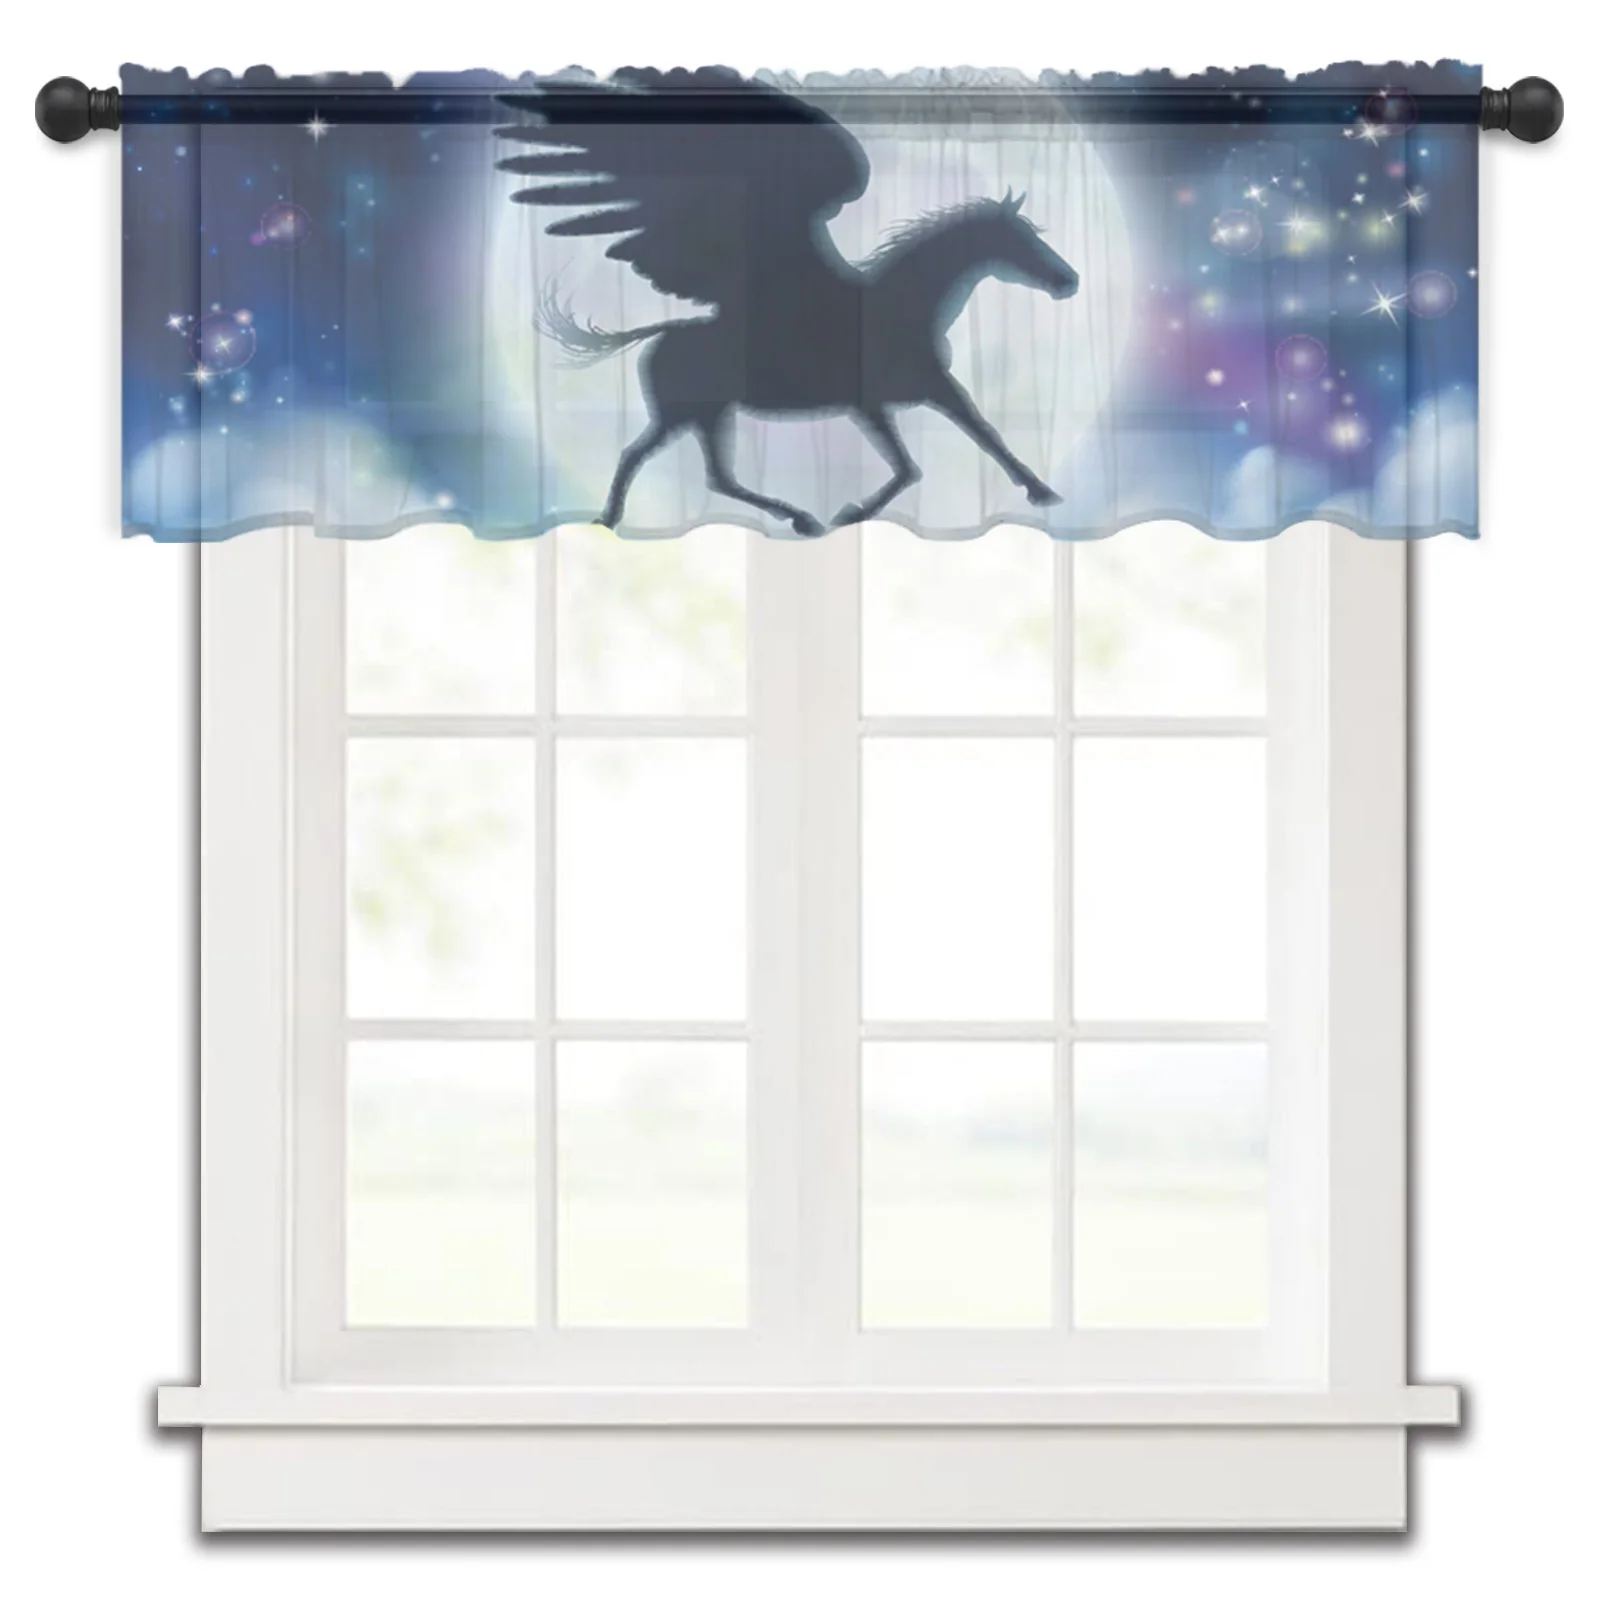 

Pegasus Moon Cloud Stars Kitchen Small Window Curtain Tulle Sheer Short Curtain Bedroom Living Room Home Decor Voile Drapes